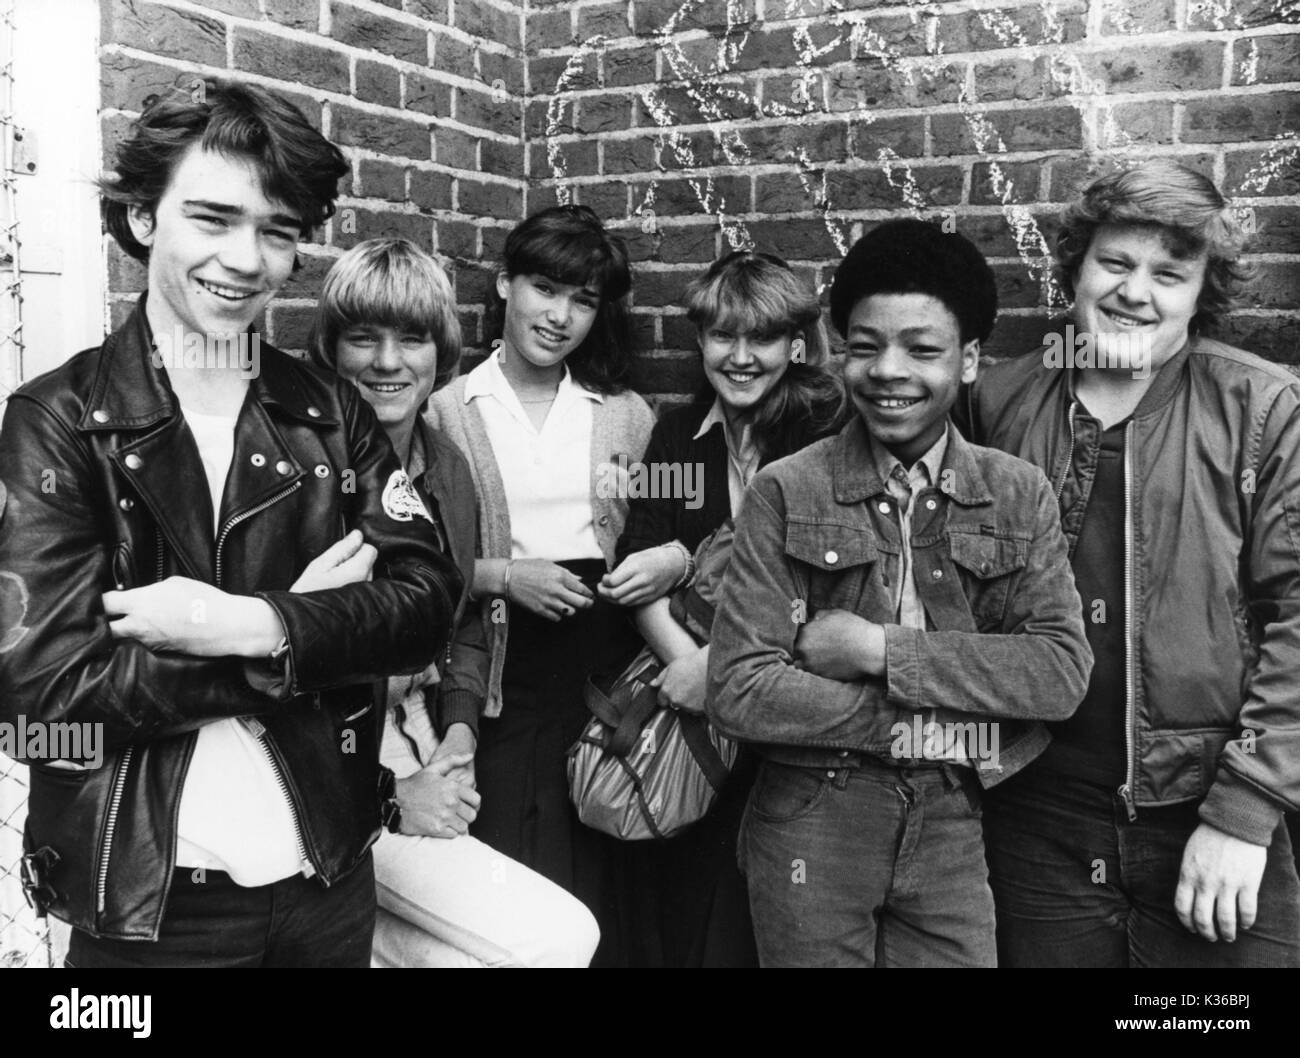 GRANGE HILL TODD CARTY AS TUCKER, PAUL McCARTHY AS TOMMY WATSON, RENE ALPERSTEIN AS PAMELA CARTWRIGHT, LINDA SLATER AS SUSI McMAHON, TERRY SUE PAT AS BENNY GREEN AND GEORGE ARMSTRONG AS ALAN HUMPHRIES Stock Photo